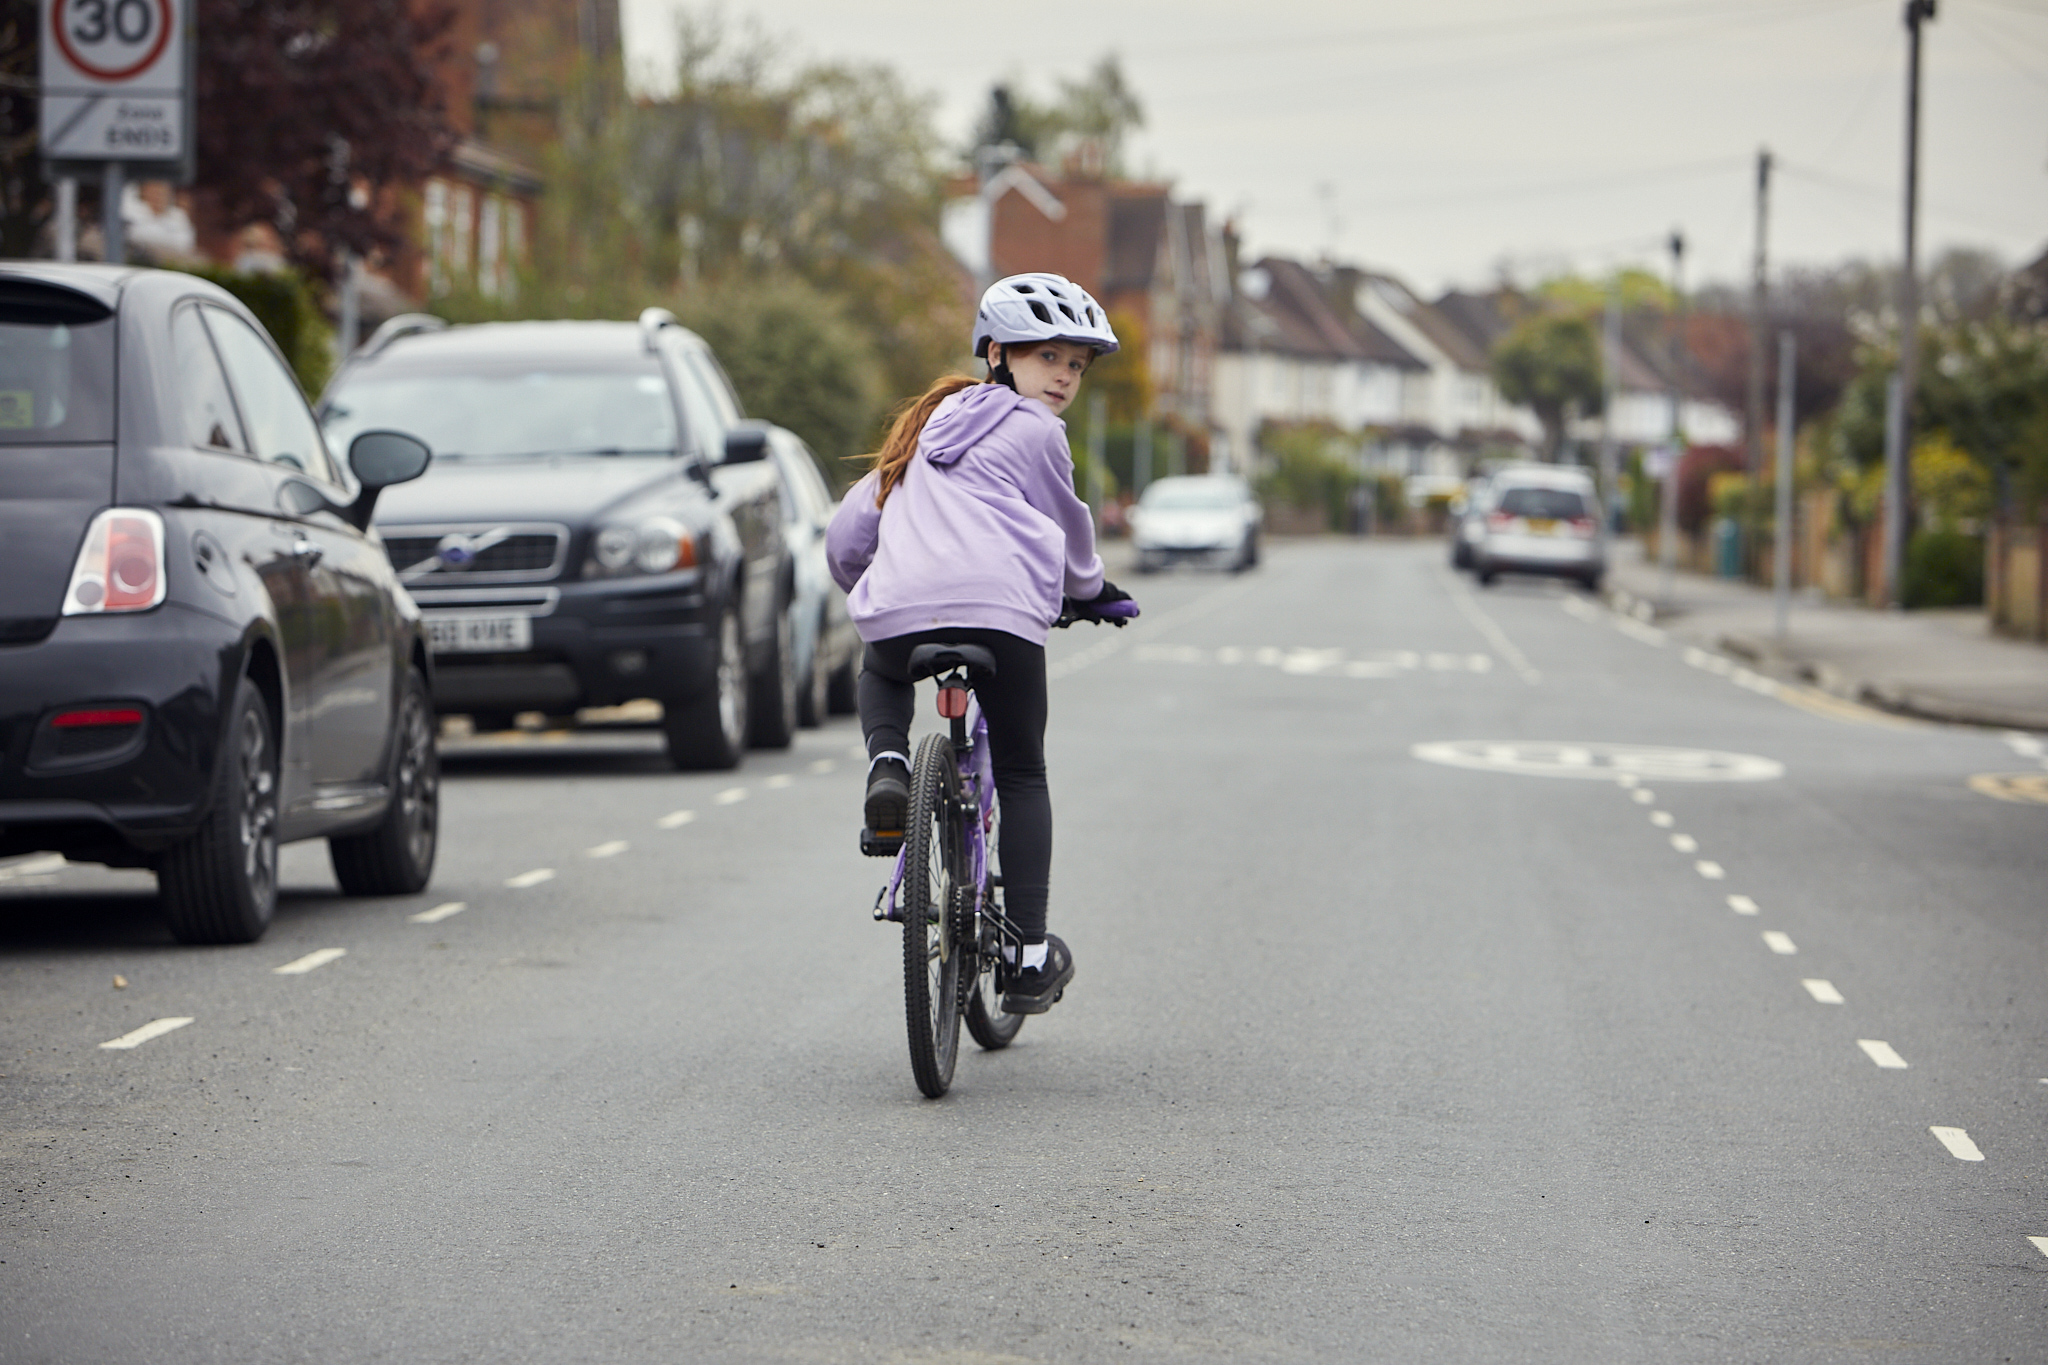 A young girl cycles on the road. She is looking over her shoulder to check before she changes position